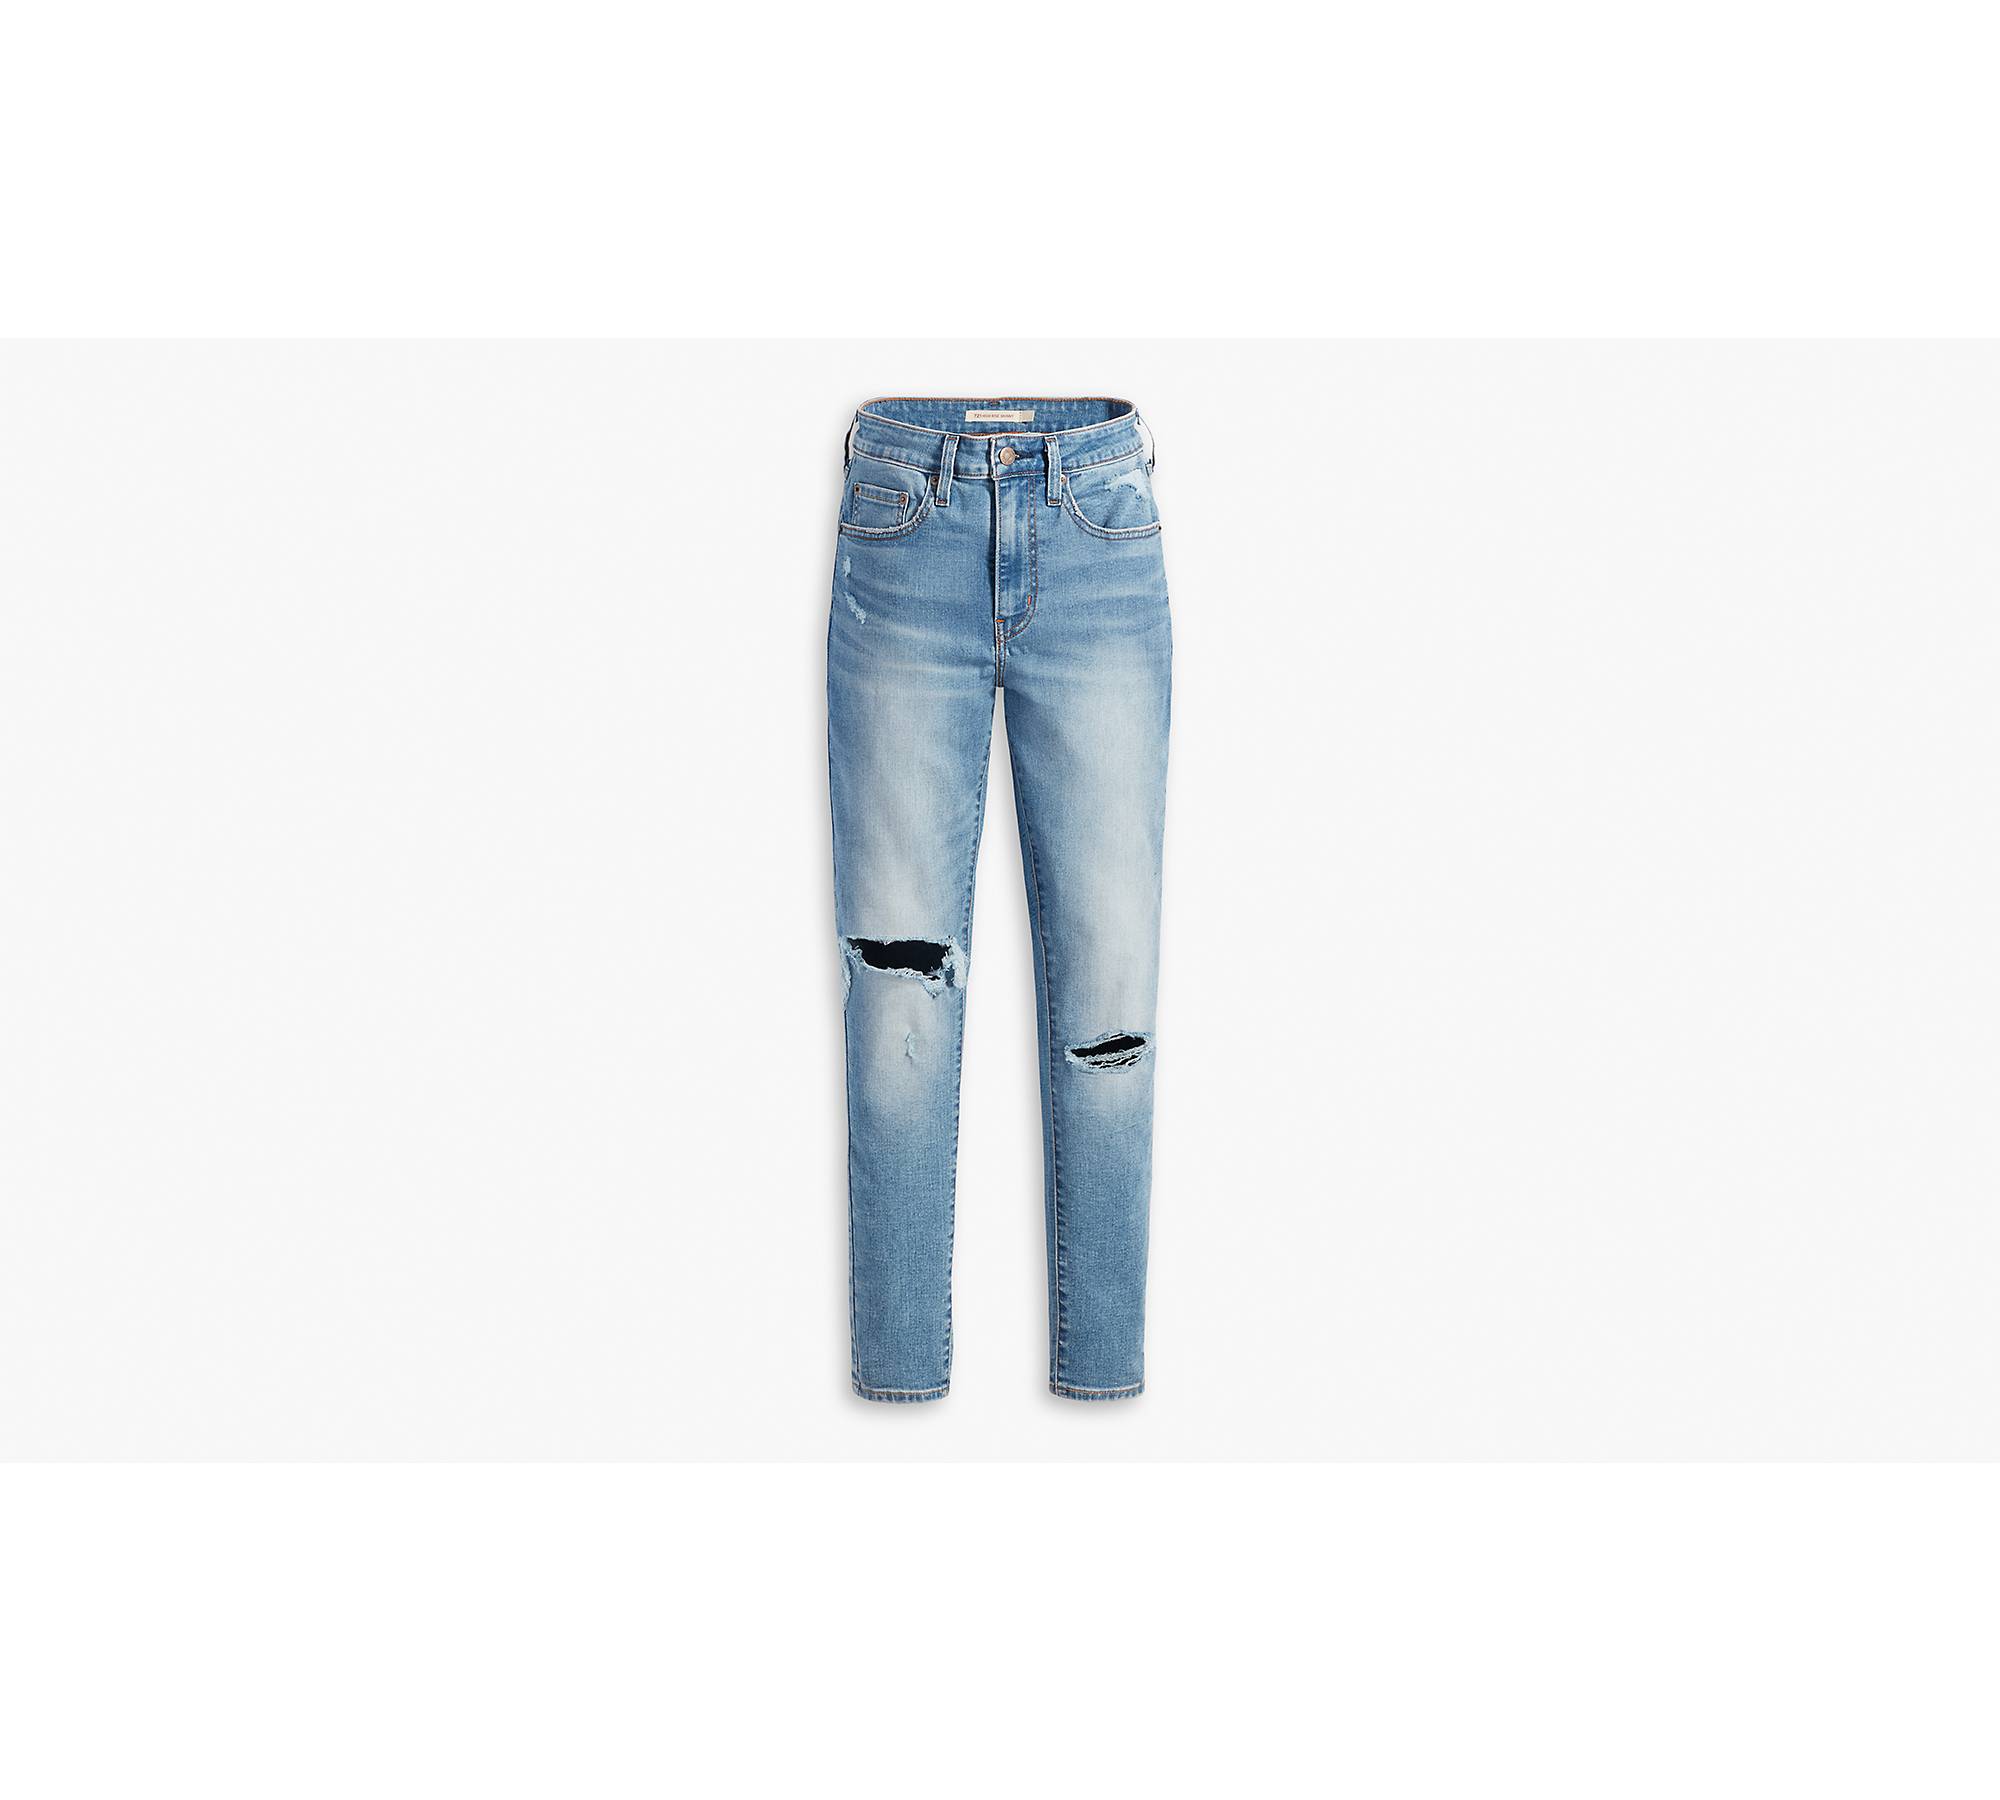 21 Best High-Waist Jeans for Women 2022: Madewell, Levi's & More